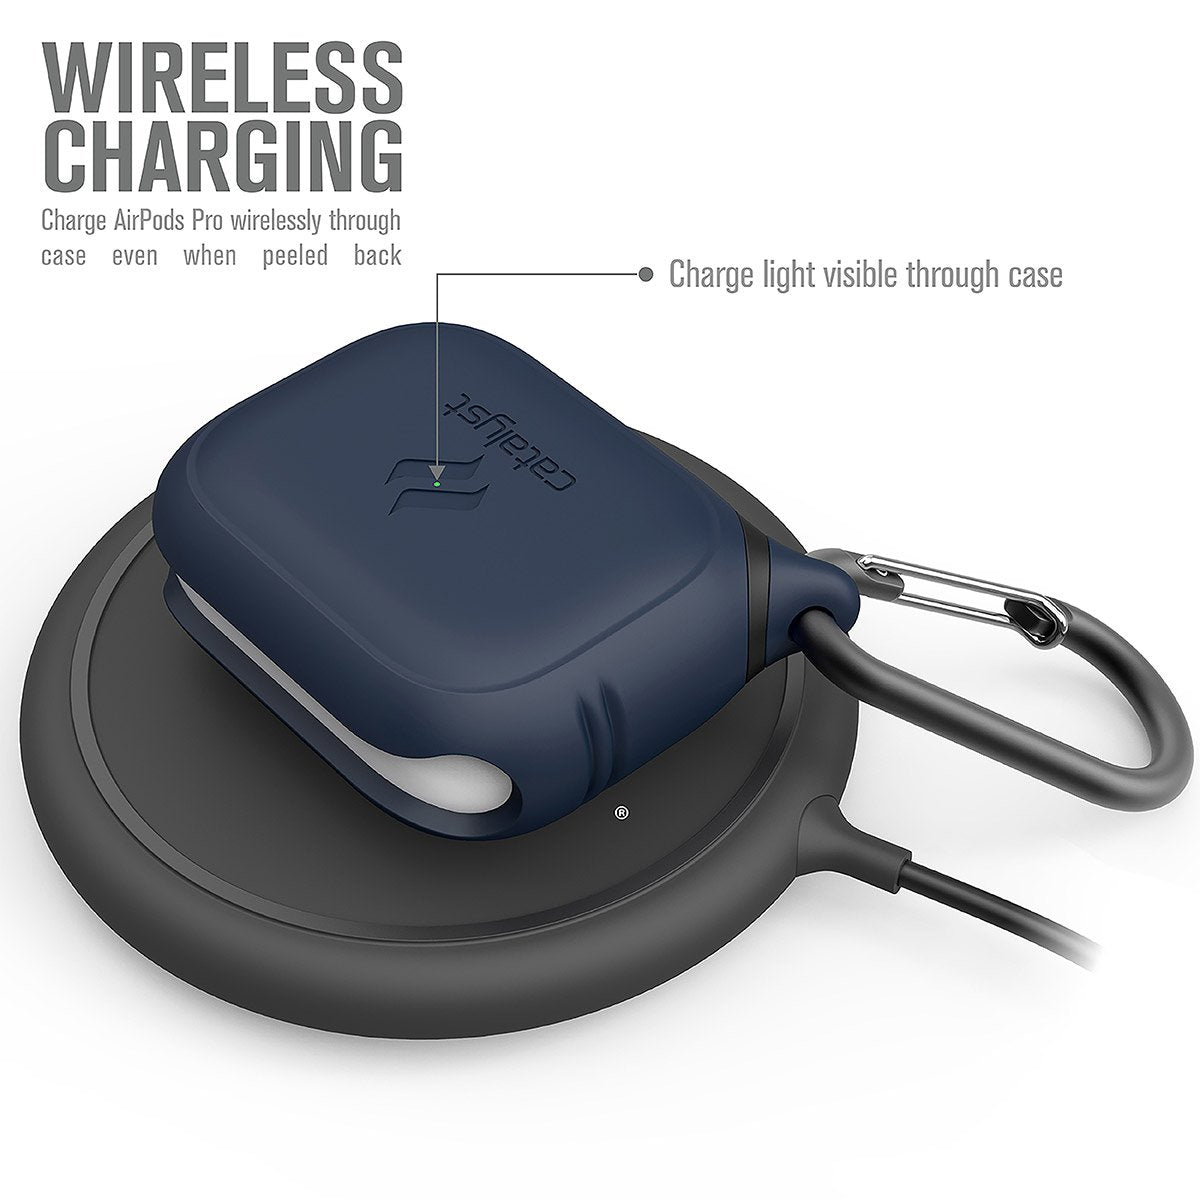 CATAPDPRONAV | catalyst airpods pro gen 2 1 waterproof case carabiner midnight blue on top of a wireless charger text reads wireless charging charge airpods pro wirelessly through case even when peeled back charge light visible through case